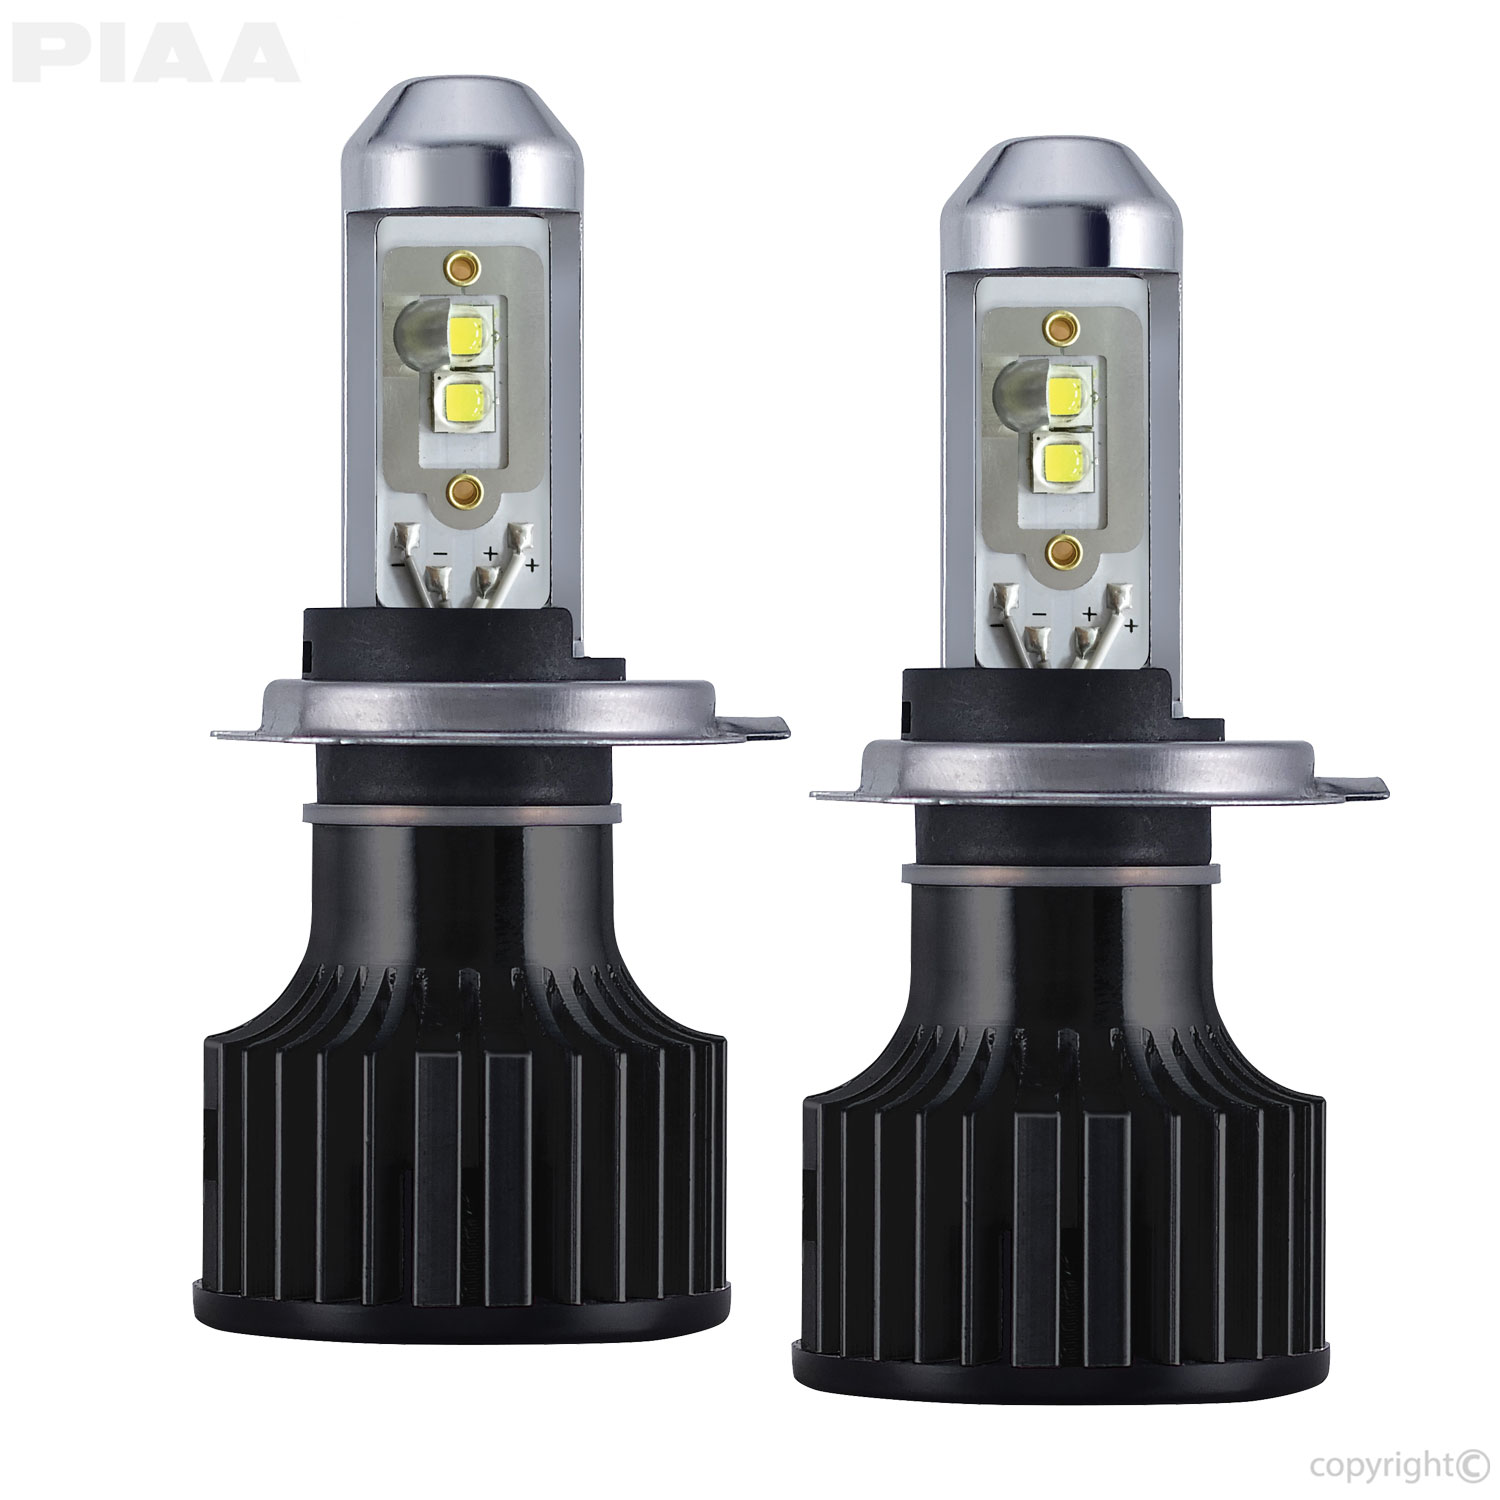 9003 H4 Led Headlight Bulbs for 2012-2020 Nissan March High/Low Beam 2pcs 